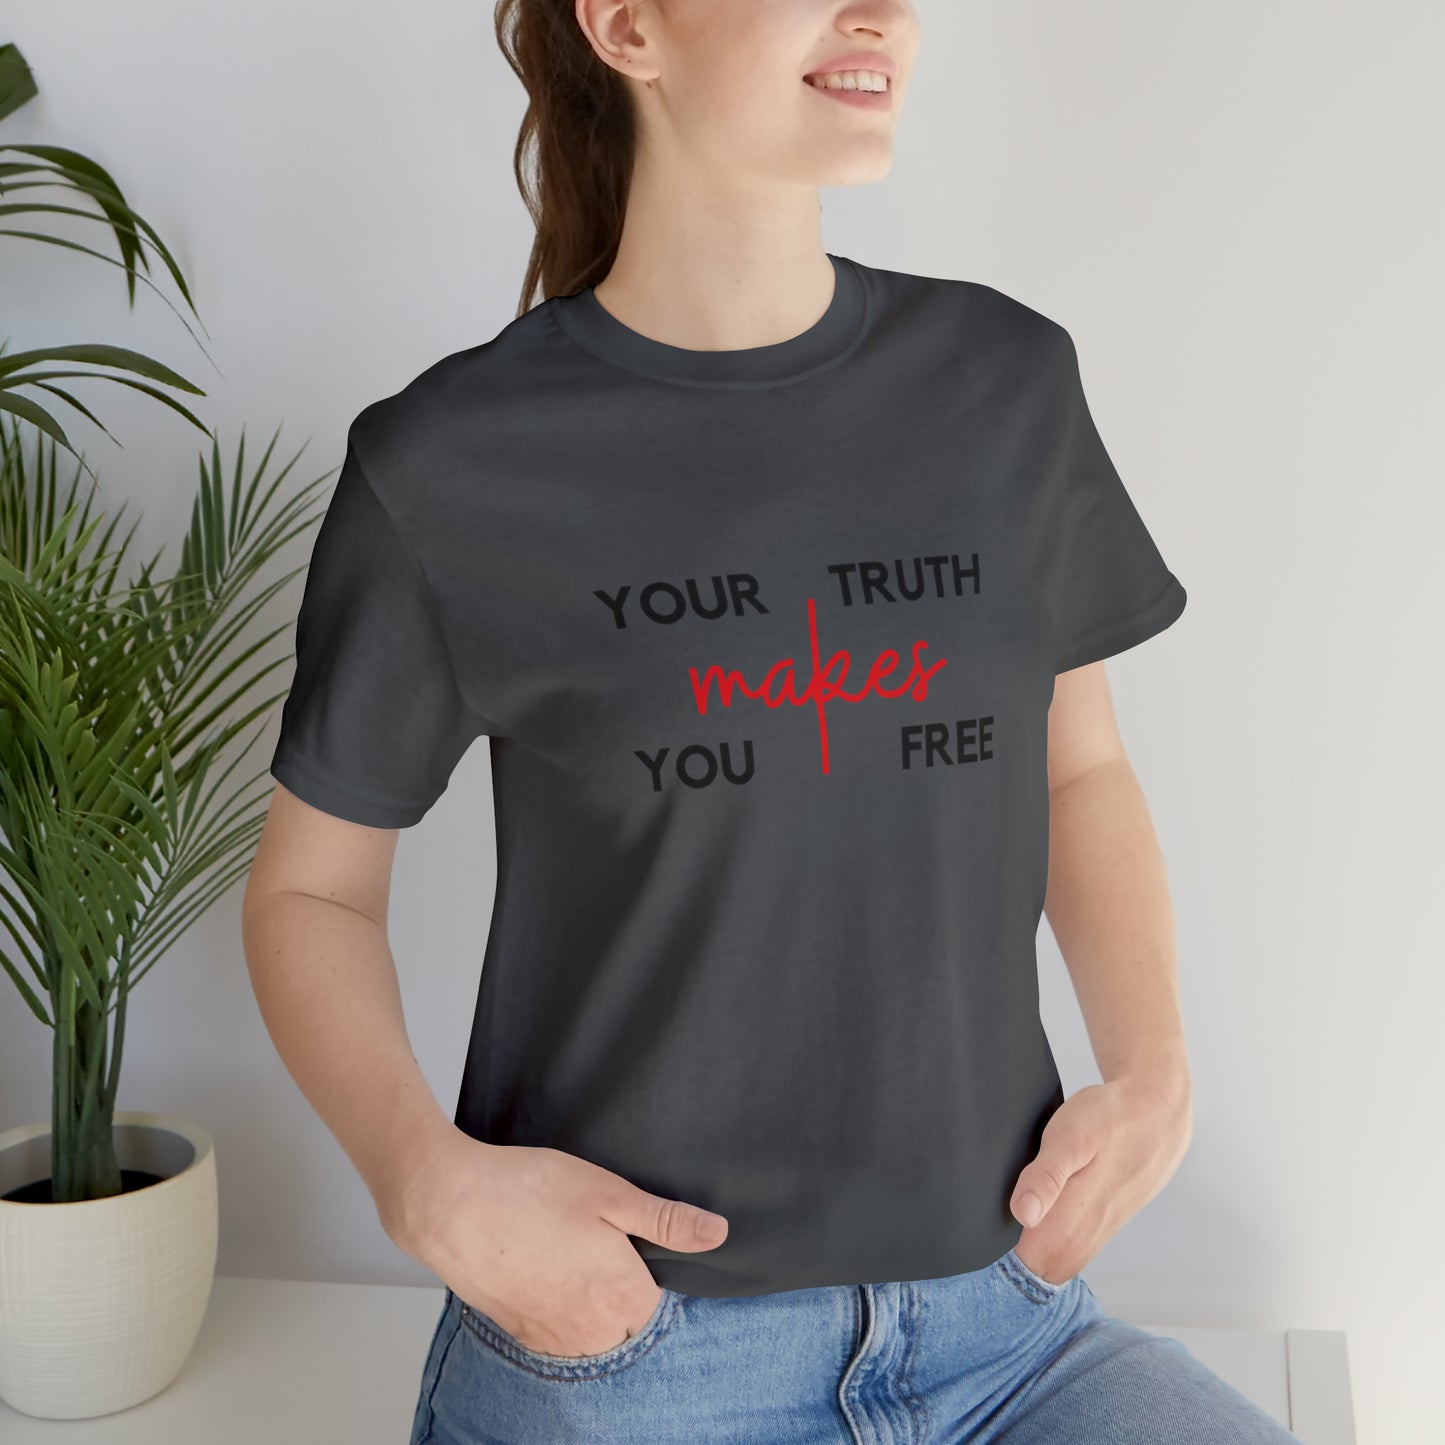 Your Truth Makes You Free Tee